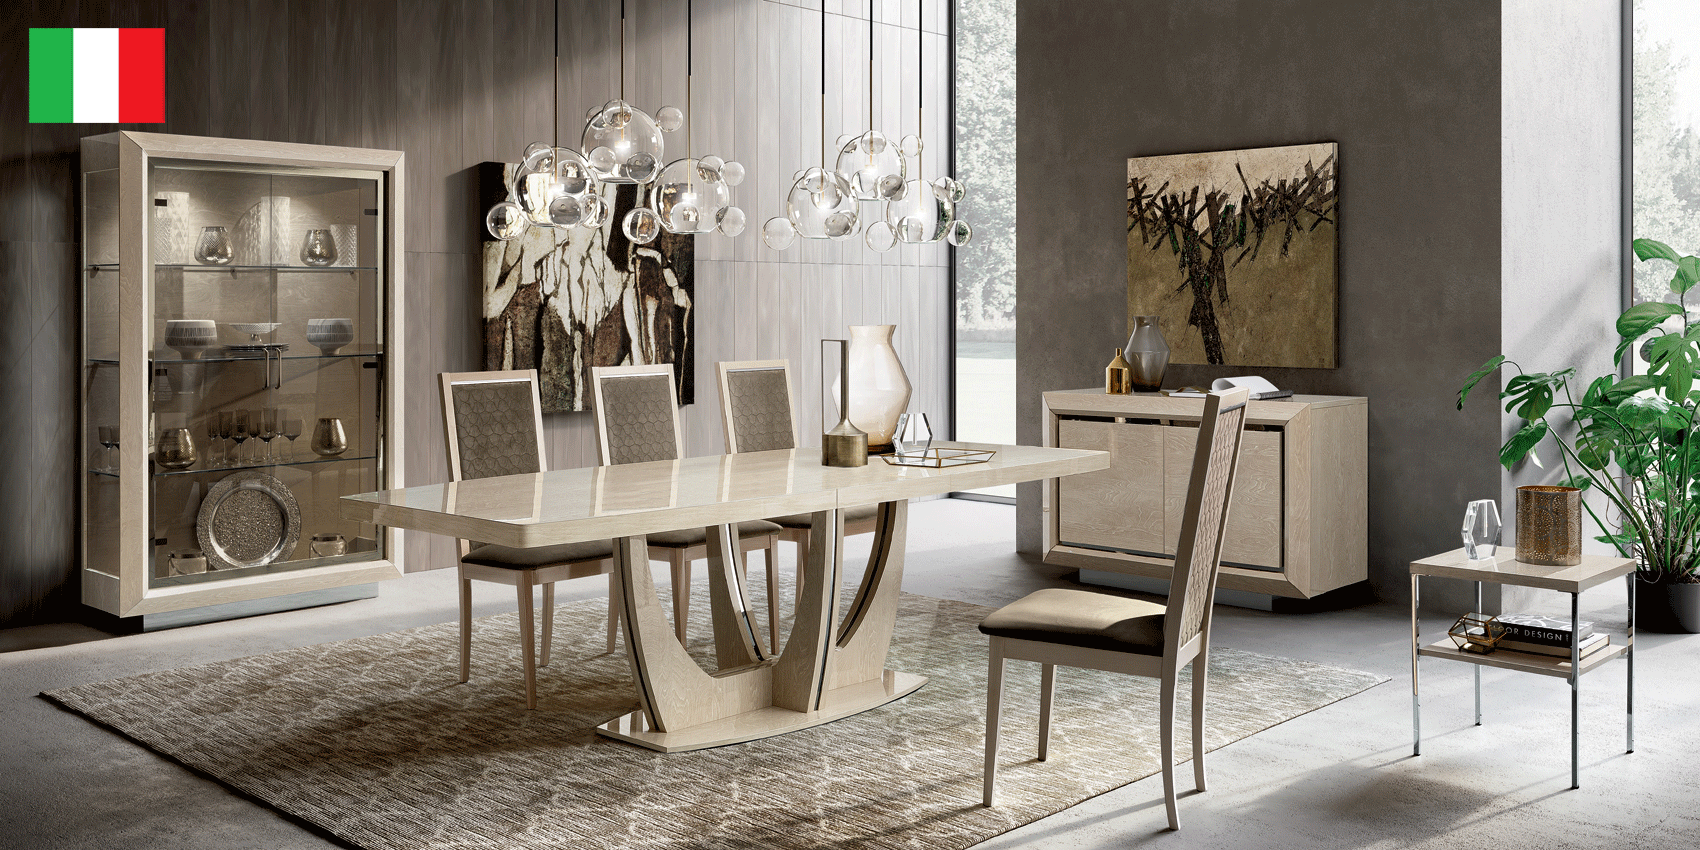 Dining Room Furniture China Cabinets and Buffets Elite Dining Ivory with Ambra “Rombi” Chairs